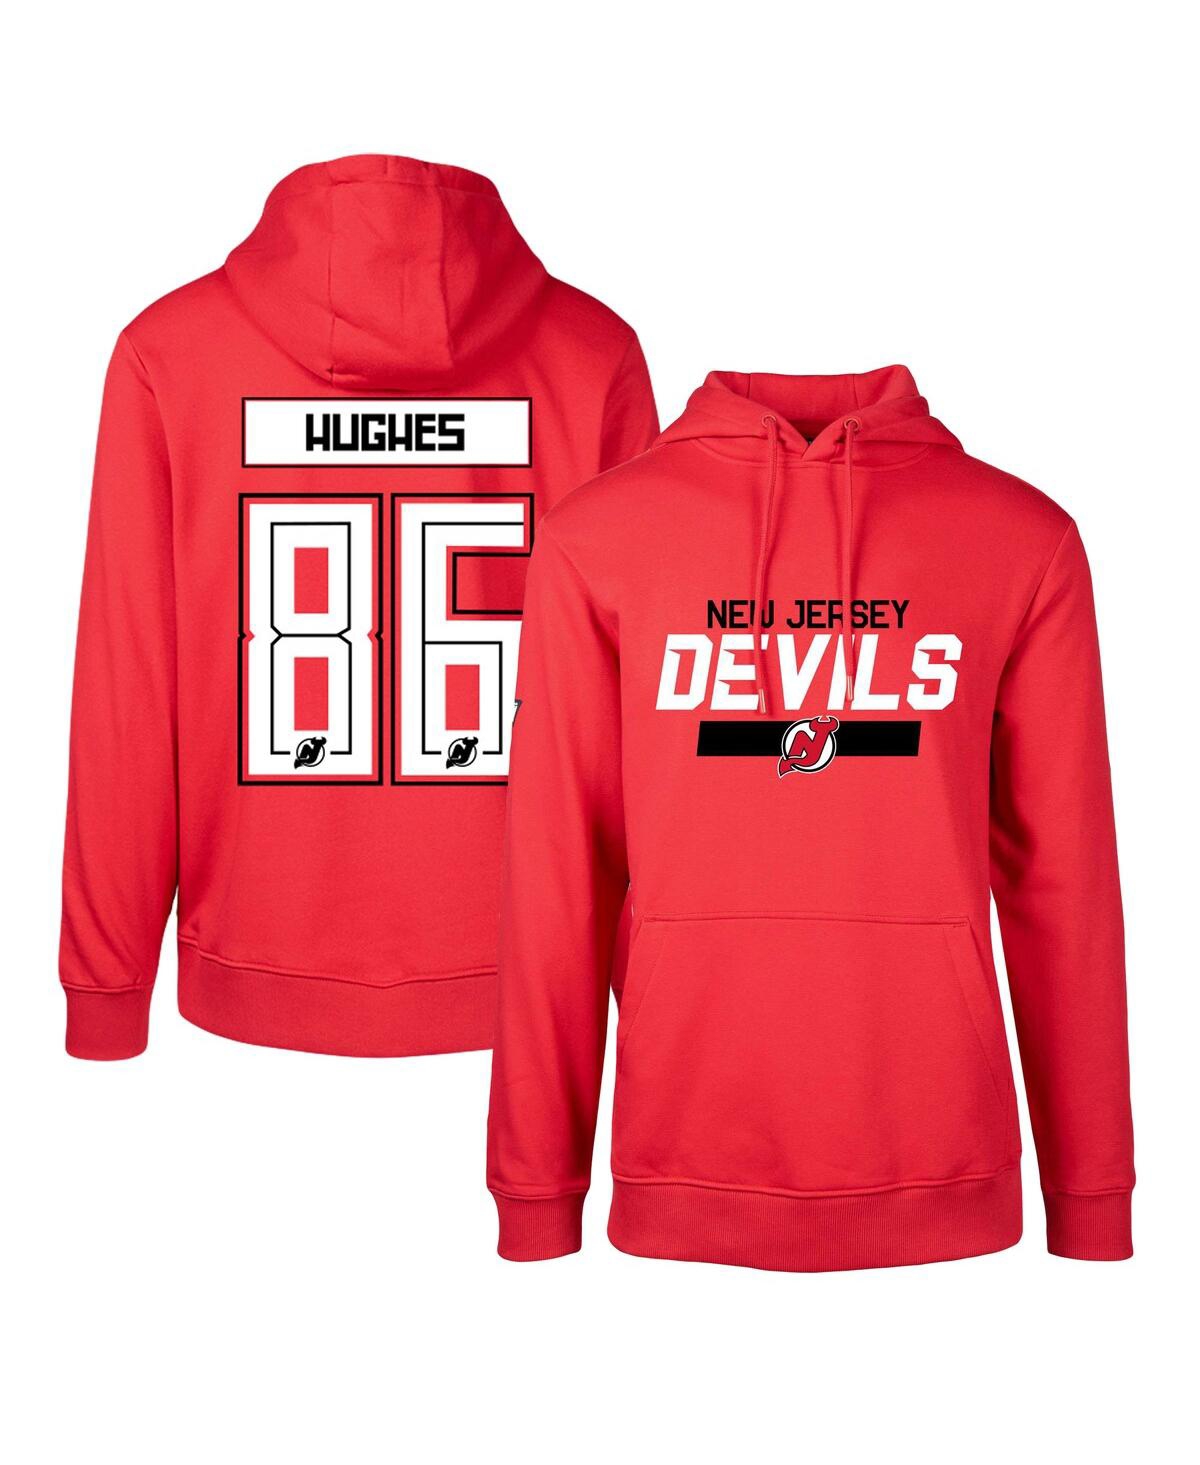 Men's LevelWear Jack Hughes Red New Jersey Devils Podium Name and Number Pullover Hoodie - Red